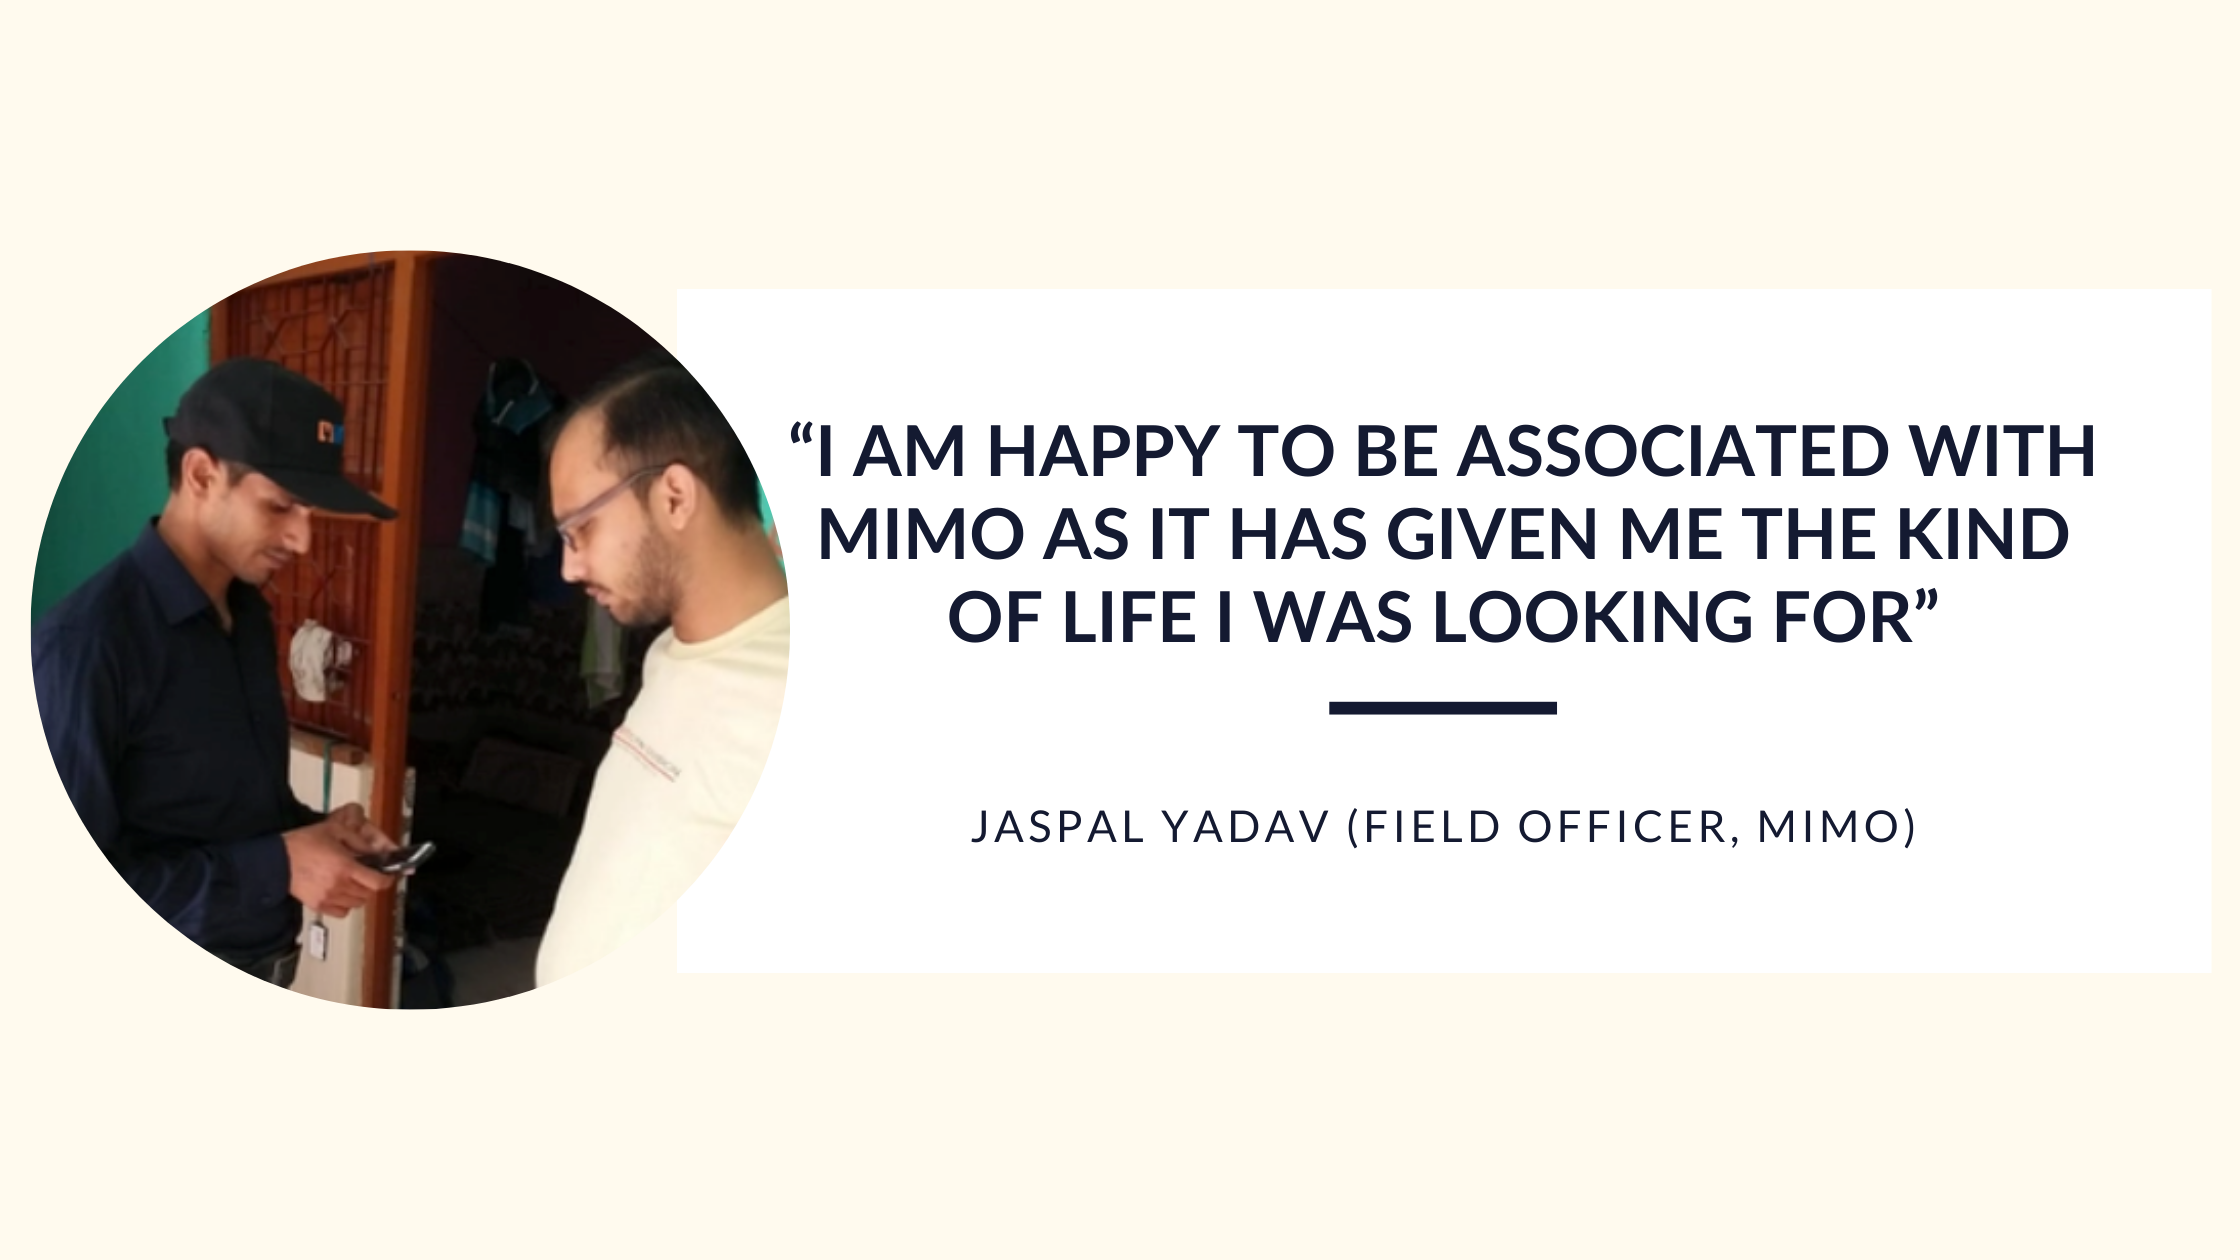 Where opportunity meets people: Jaspal Yadav’s Story